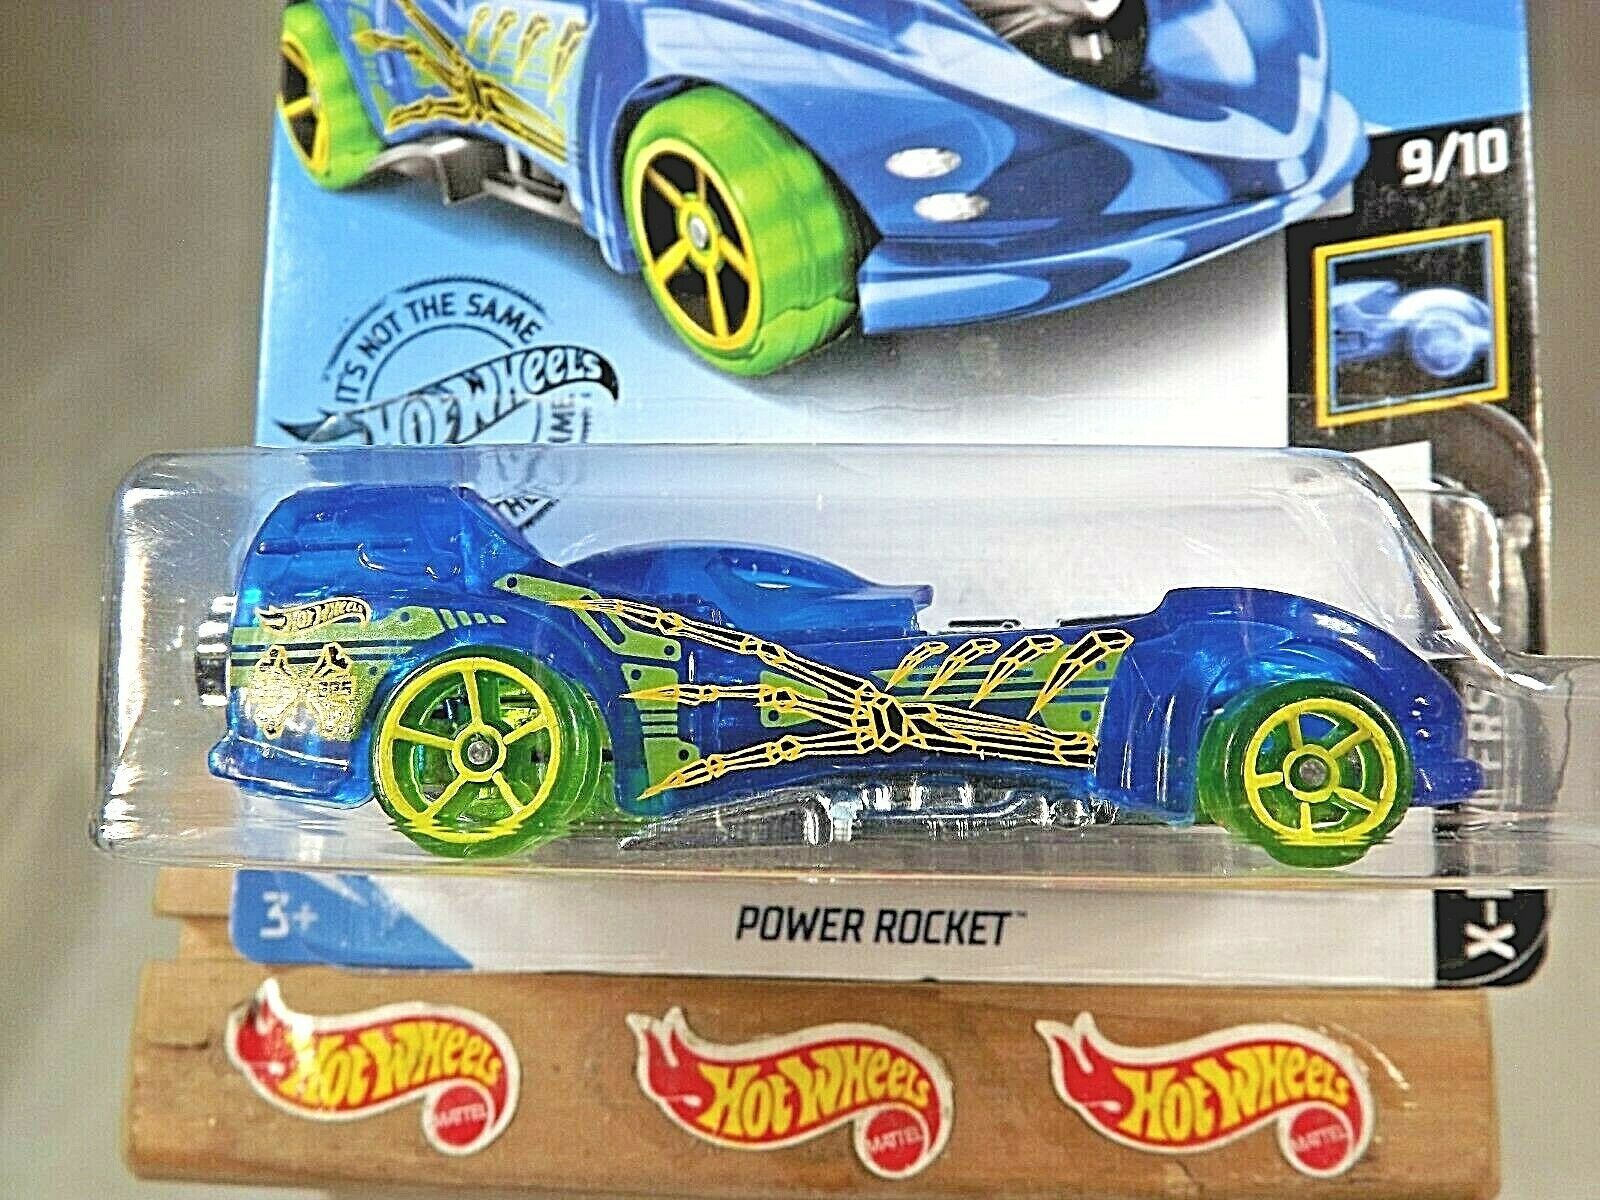 2020 Hot Wheels 48 X Racers 910 Power Rocket Trans Blue Variation Wyellow Oh5 Contemporary 2280